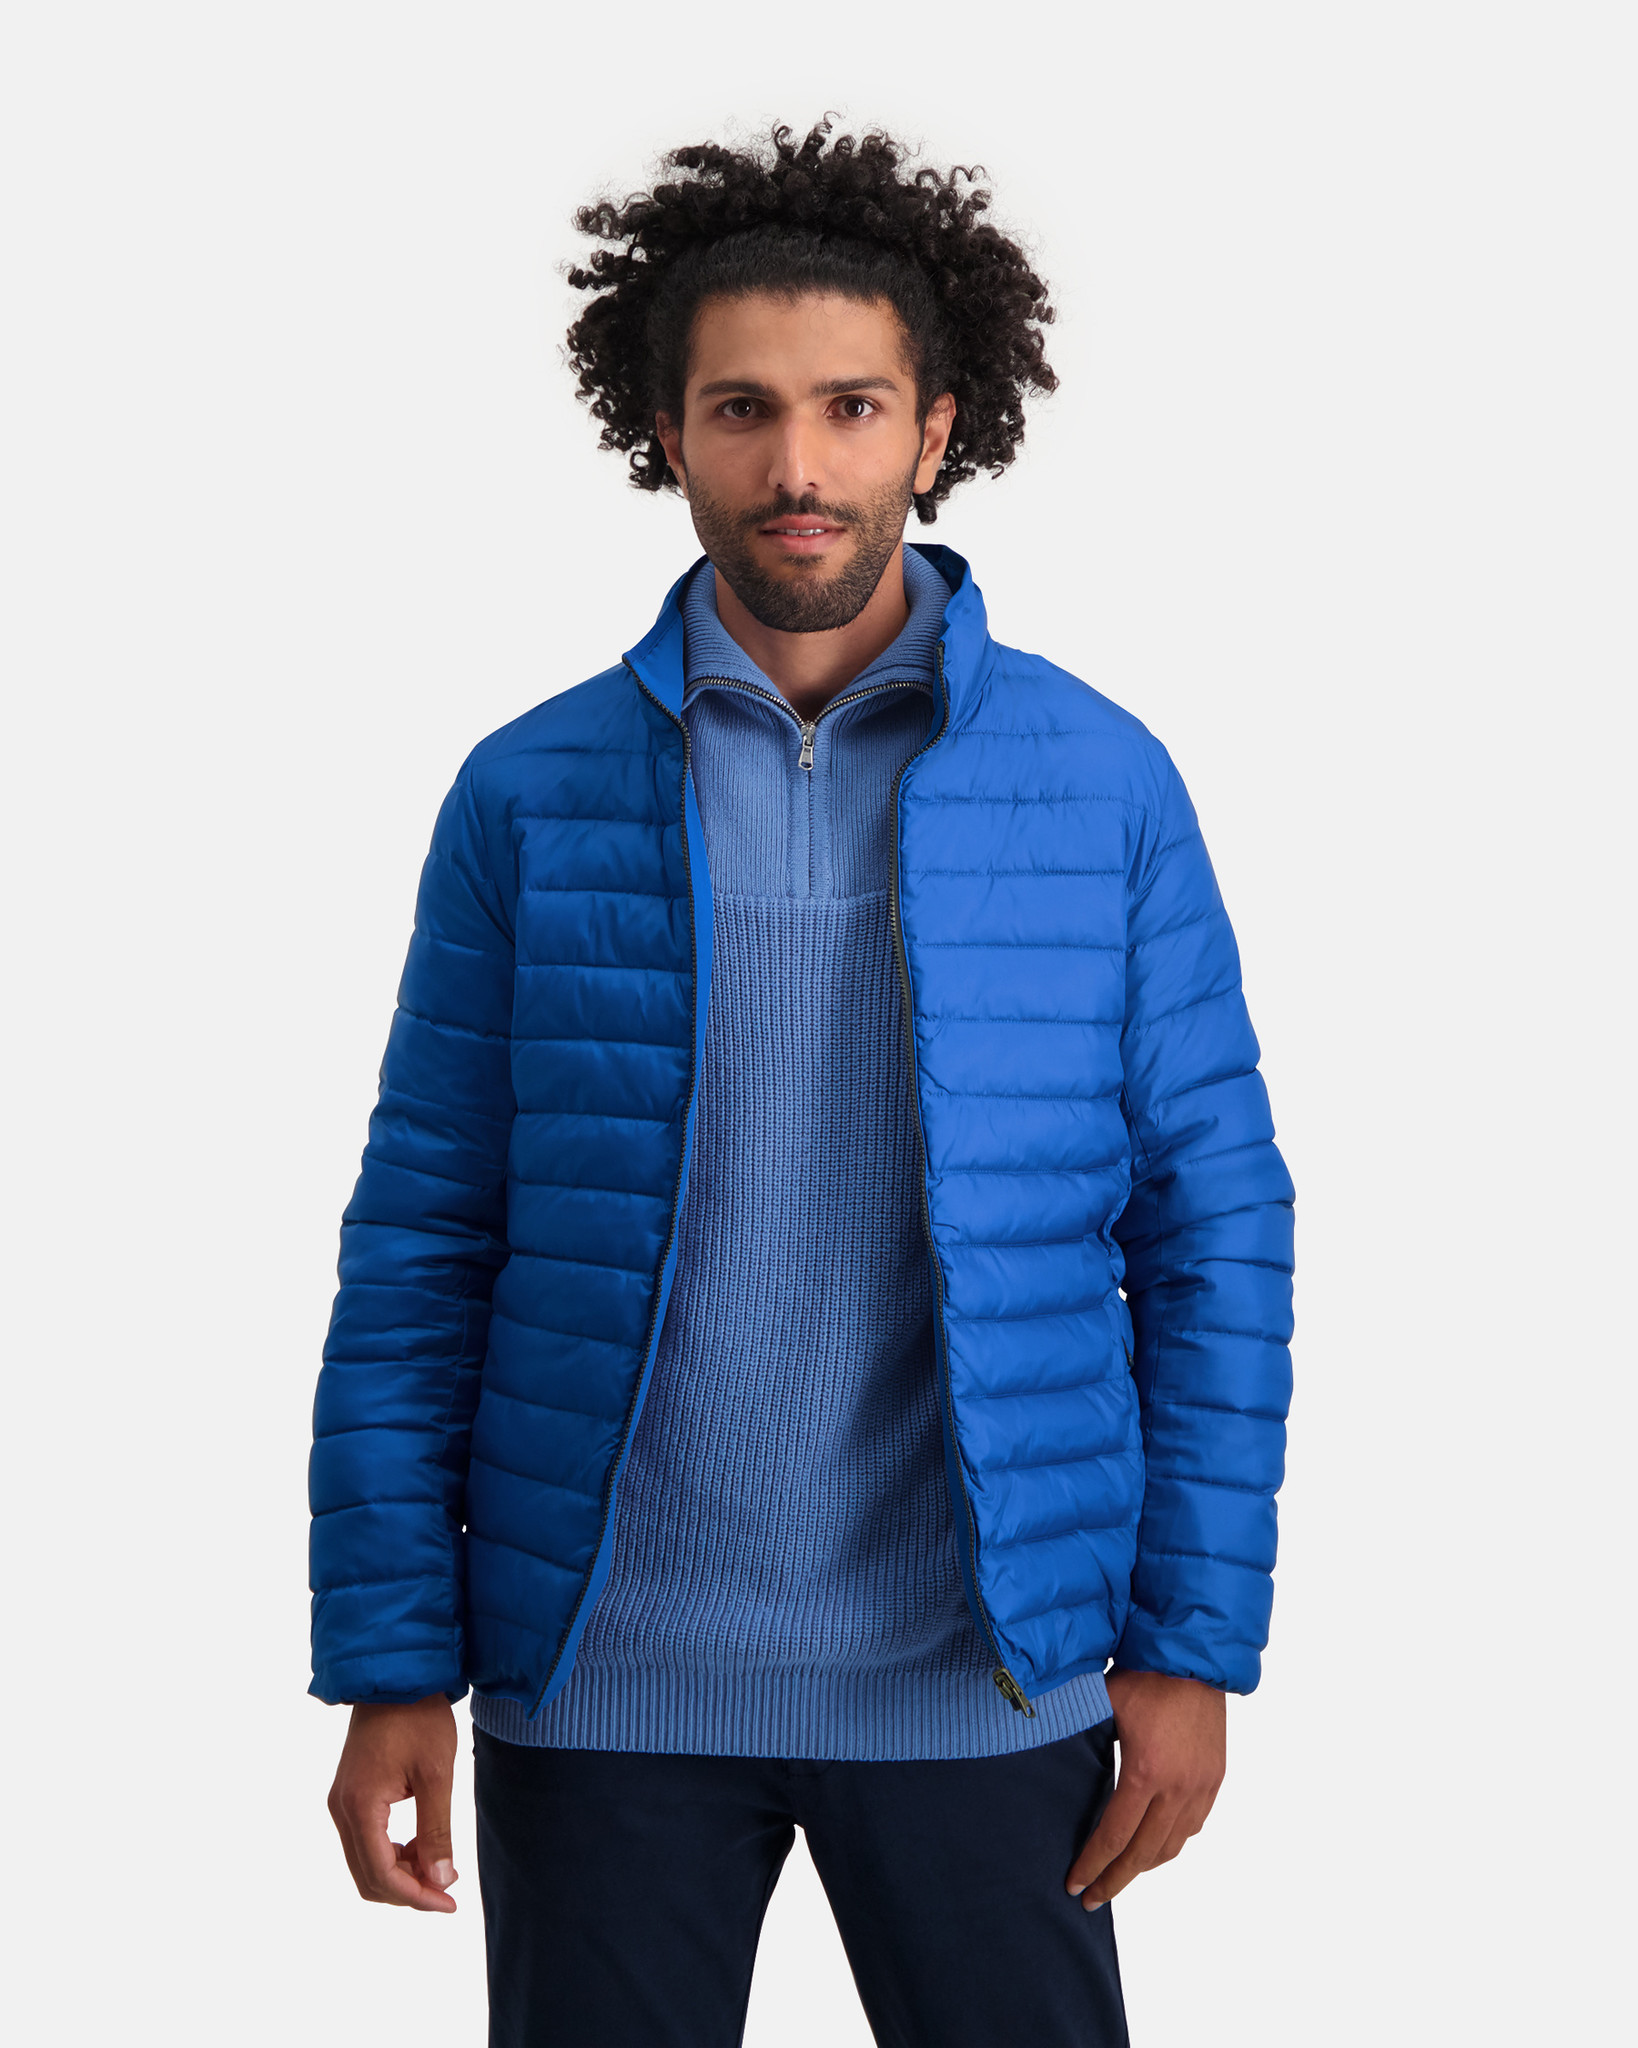 The 4 in 1 Robison jacket